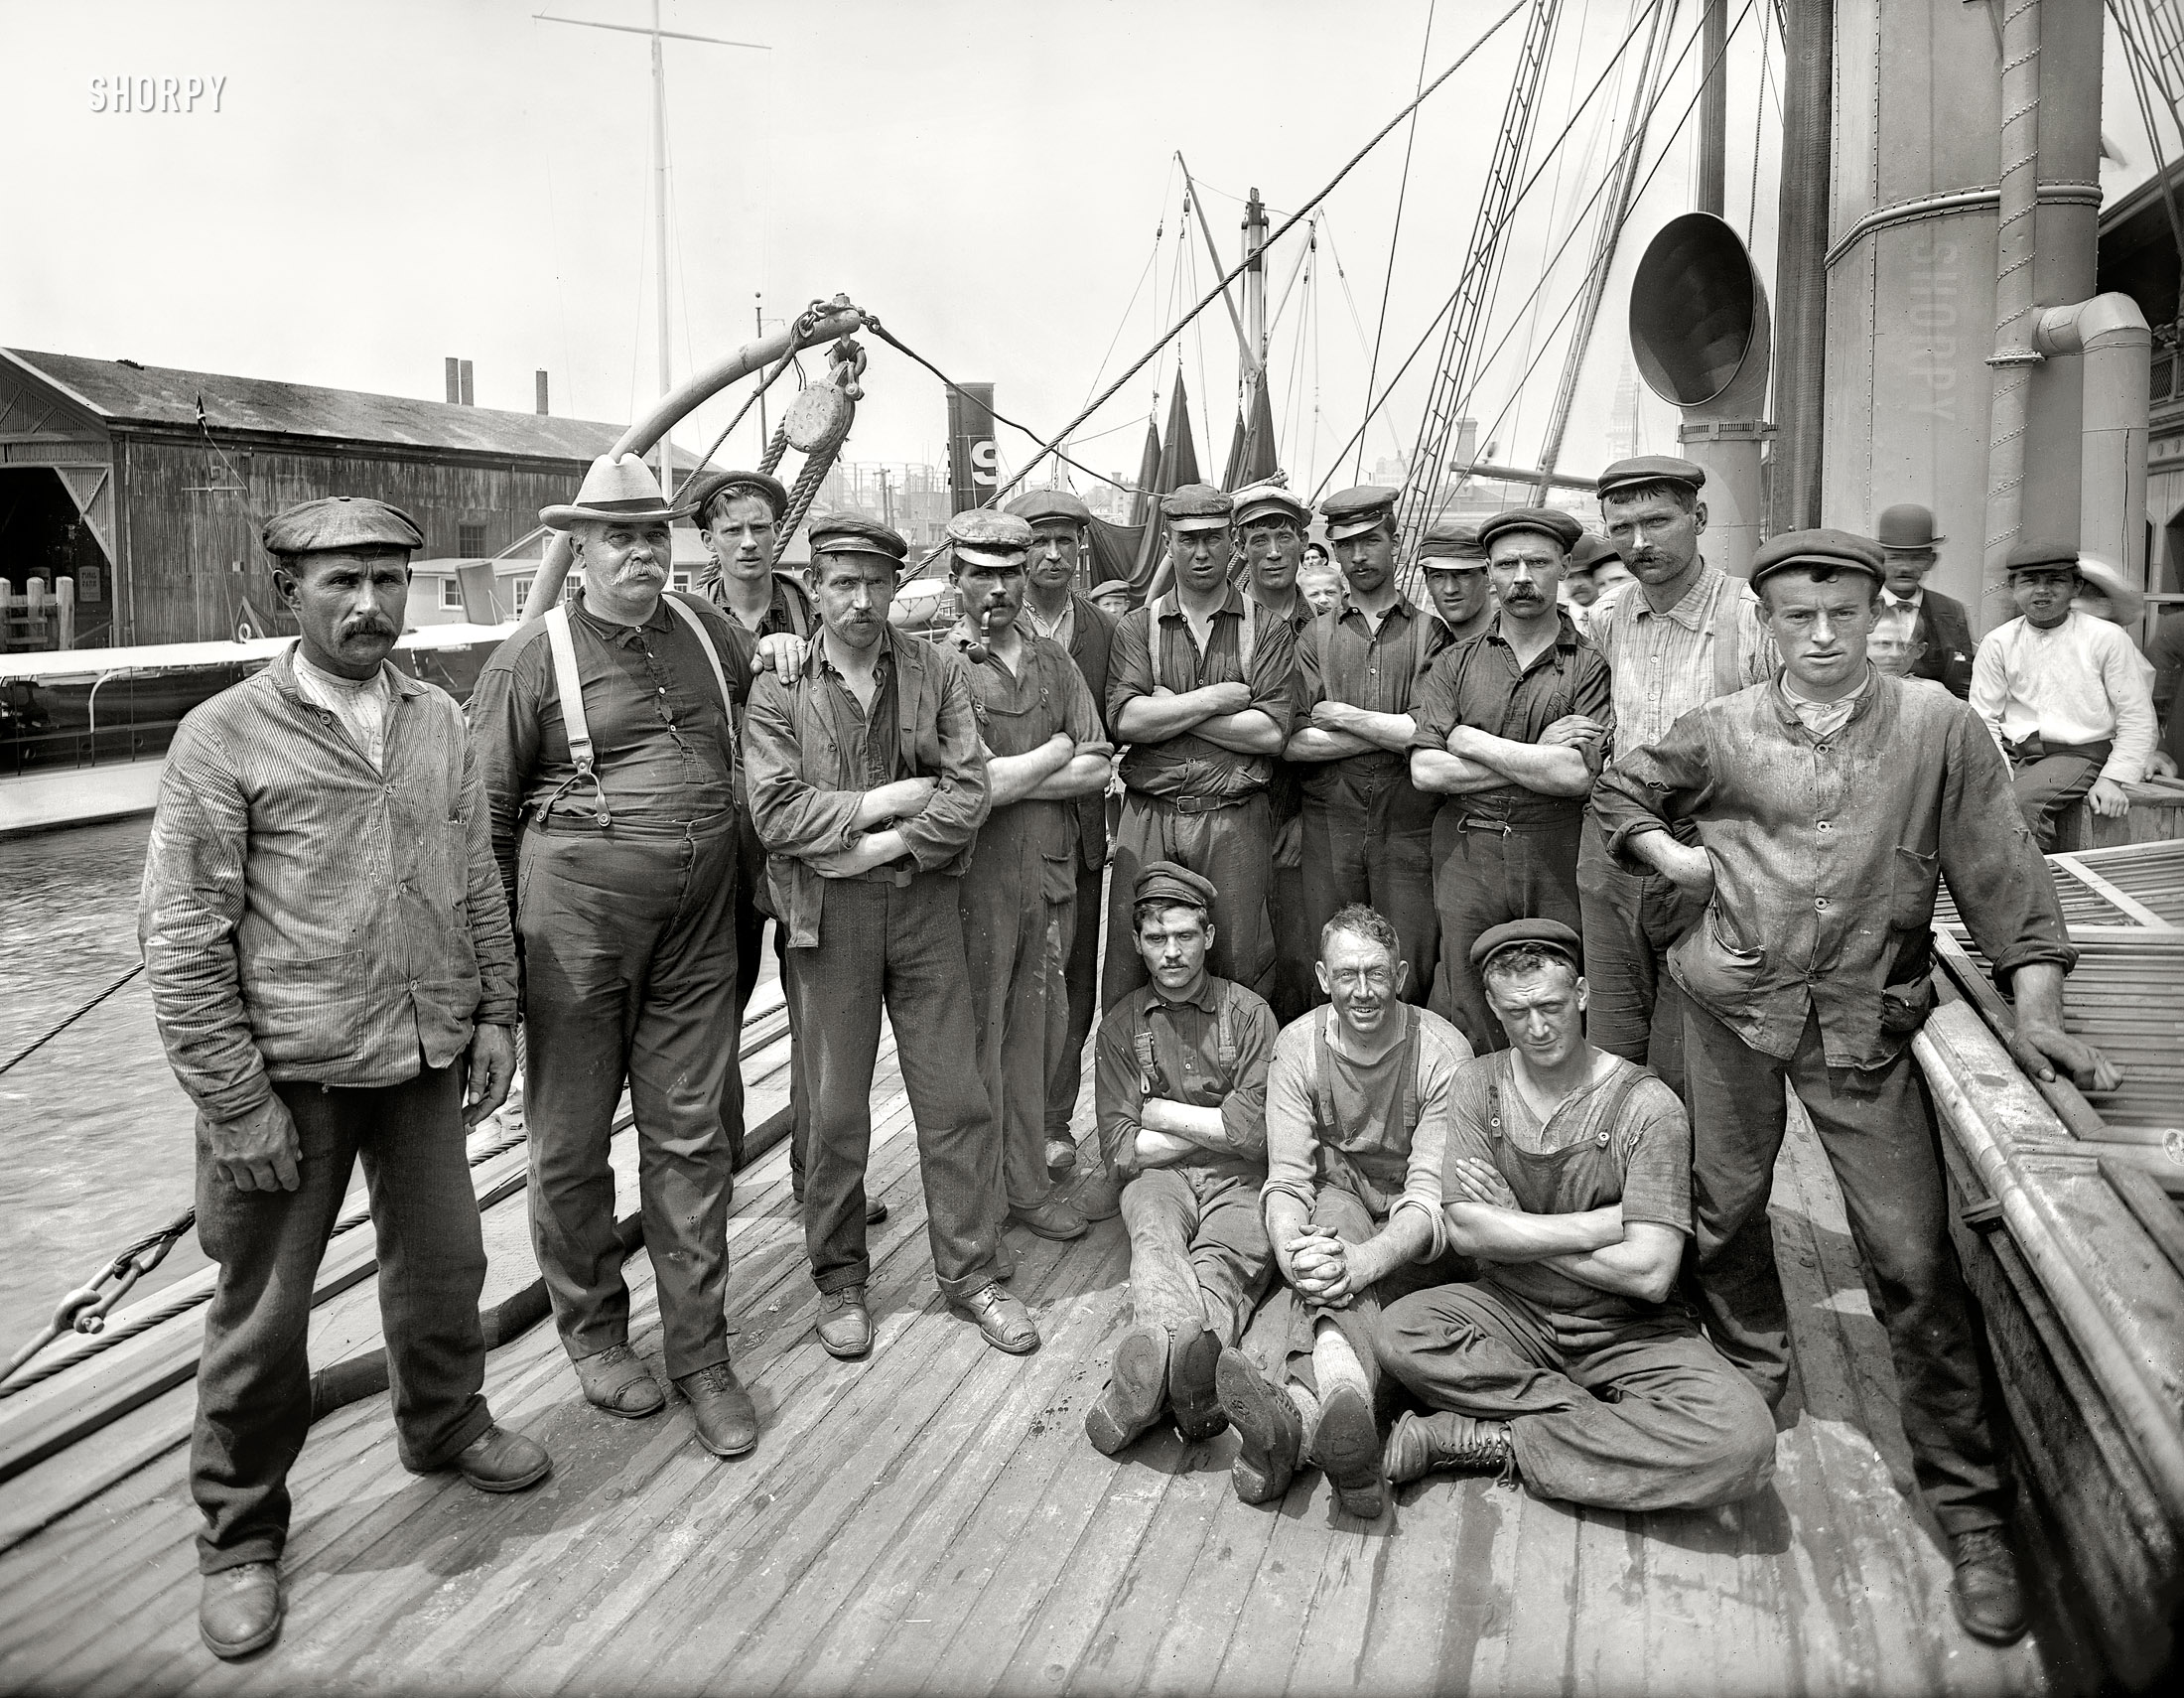 New York, September 4, 1909. "Crew of Peary arctic ship Roosevelt: First Mate Thomas Gushue (far left), Chief Engineer George A. Wardwell and the men." The Roosevelt sailed in the Hudson-Fulton celebration shortly after this portrait was made. 8x10 glass negative, Bain News Service. View full size.